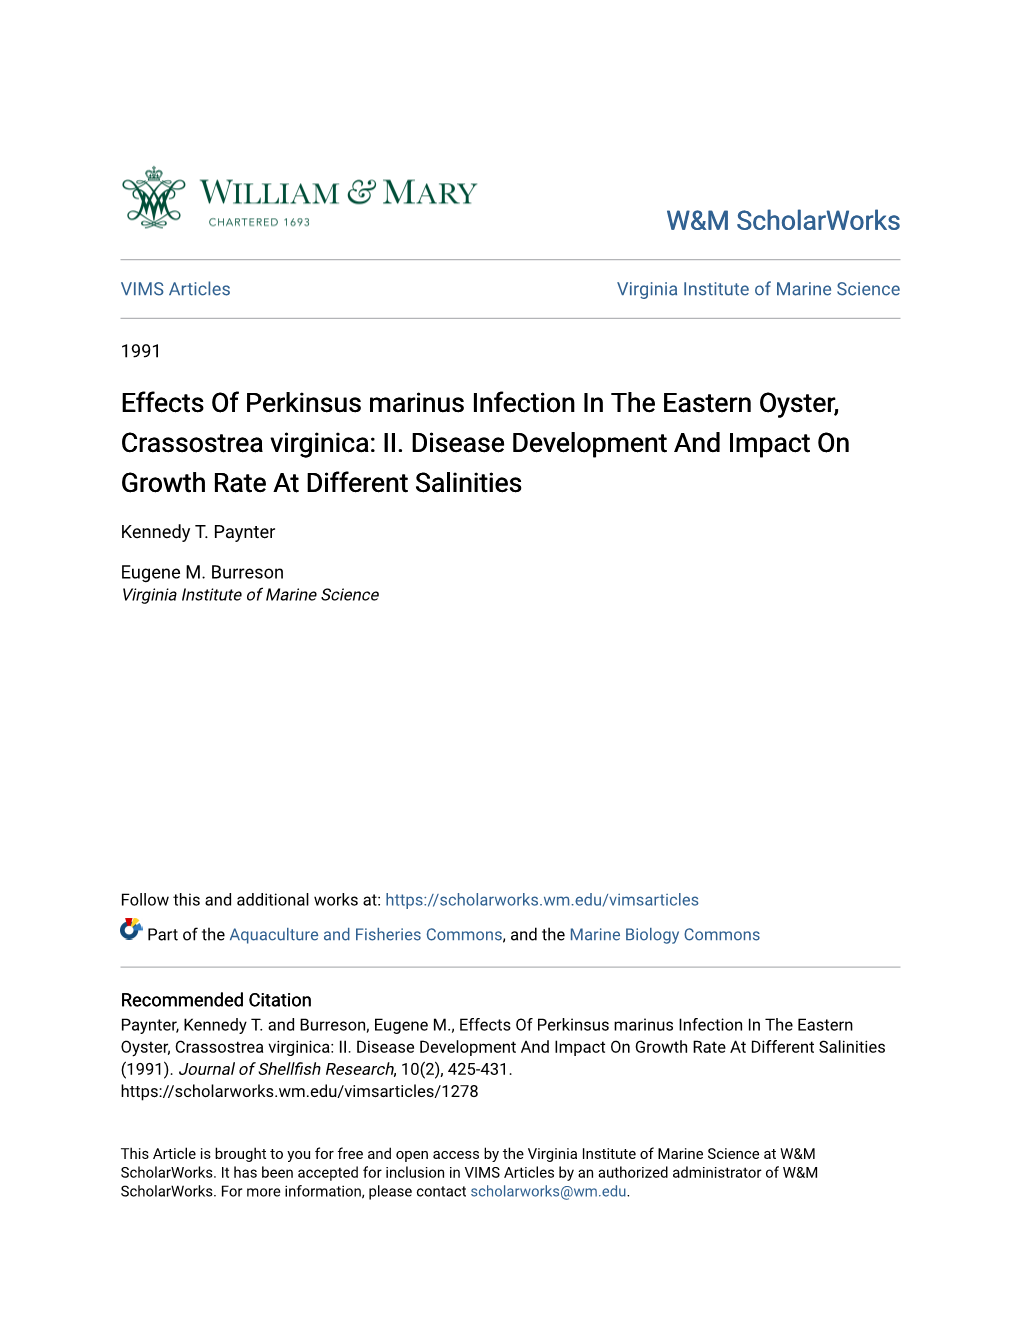 Effects of Perkinsus Marinus Infection in the Eastern Oyster, Crassostrea Virginica: II